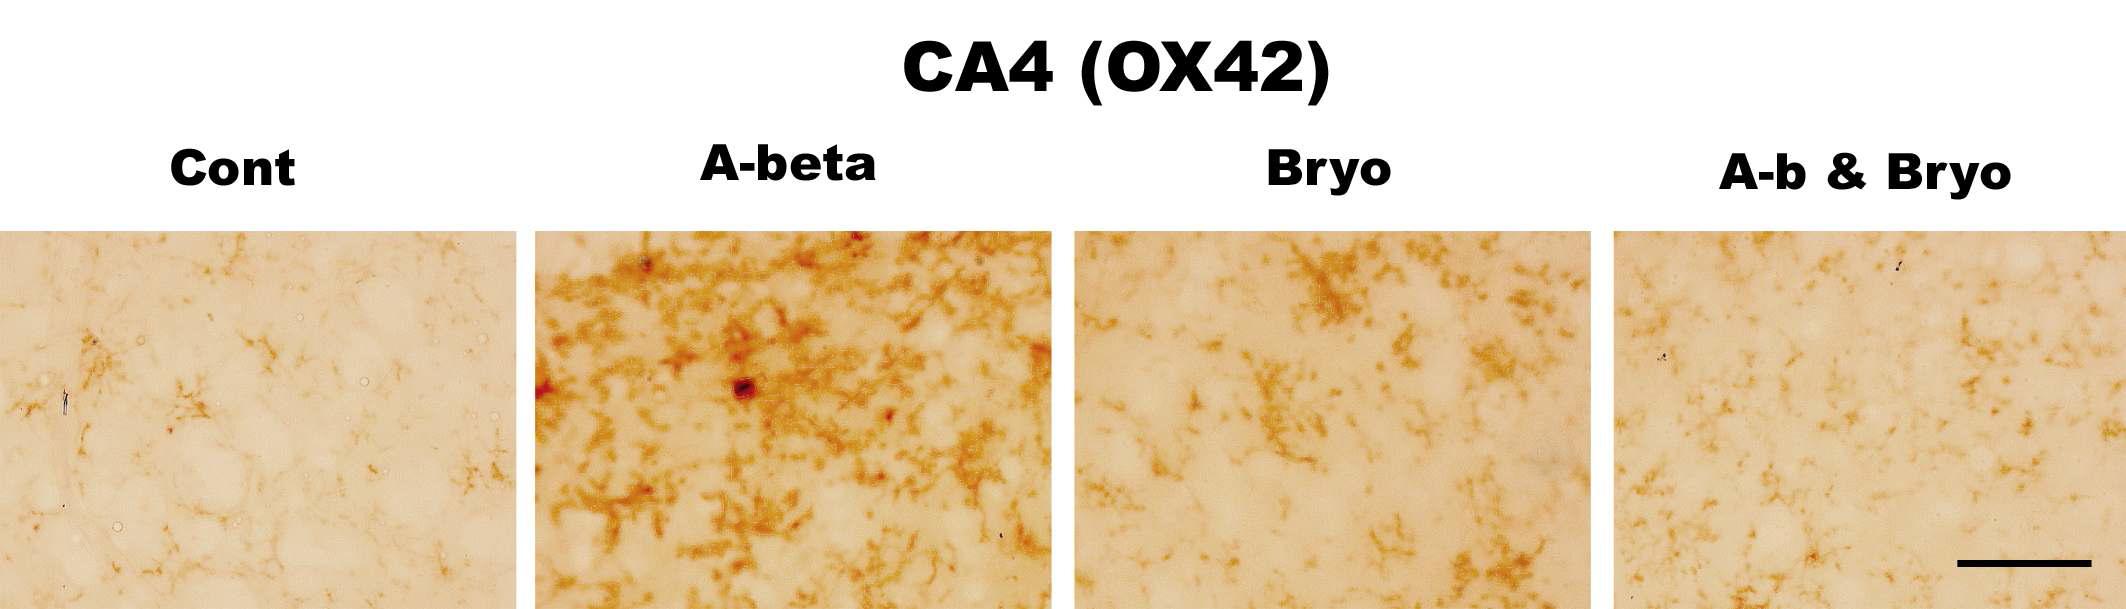 Effects of Bryostatin-1 on glial cell activation in CA4 hippocampus in rat. Bryostatin-1 significantly suppresses a microglia activation in CA4 of rat infused with amyloid beta. Intracerebro-ventricular infusion of Aβ and Bryostatin-1 was for four weeks using a micro-osmotic pump. Immuno- histochemistry (anti-CD11b) (scale bar, 50μm)(40Χ magnification)